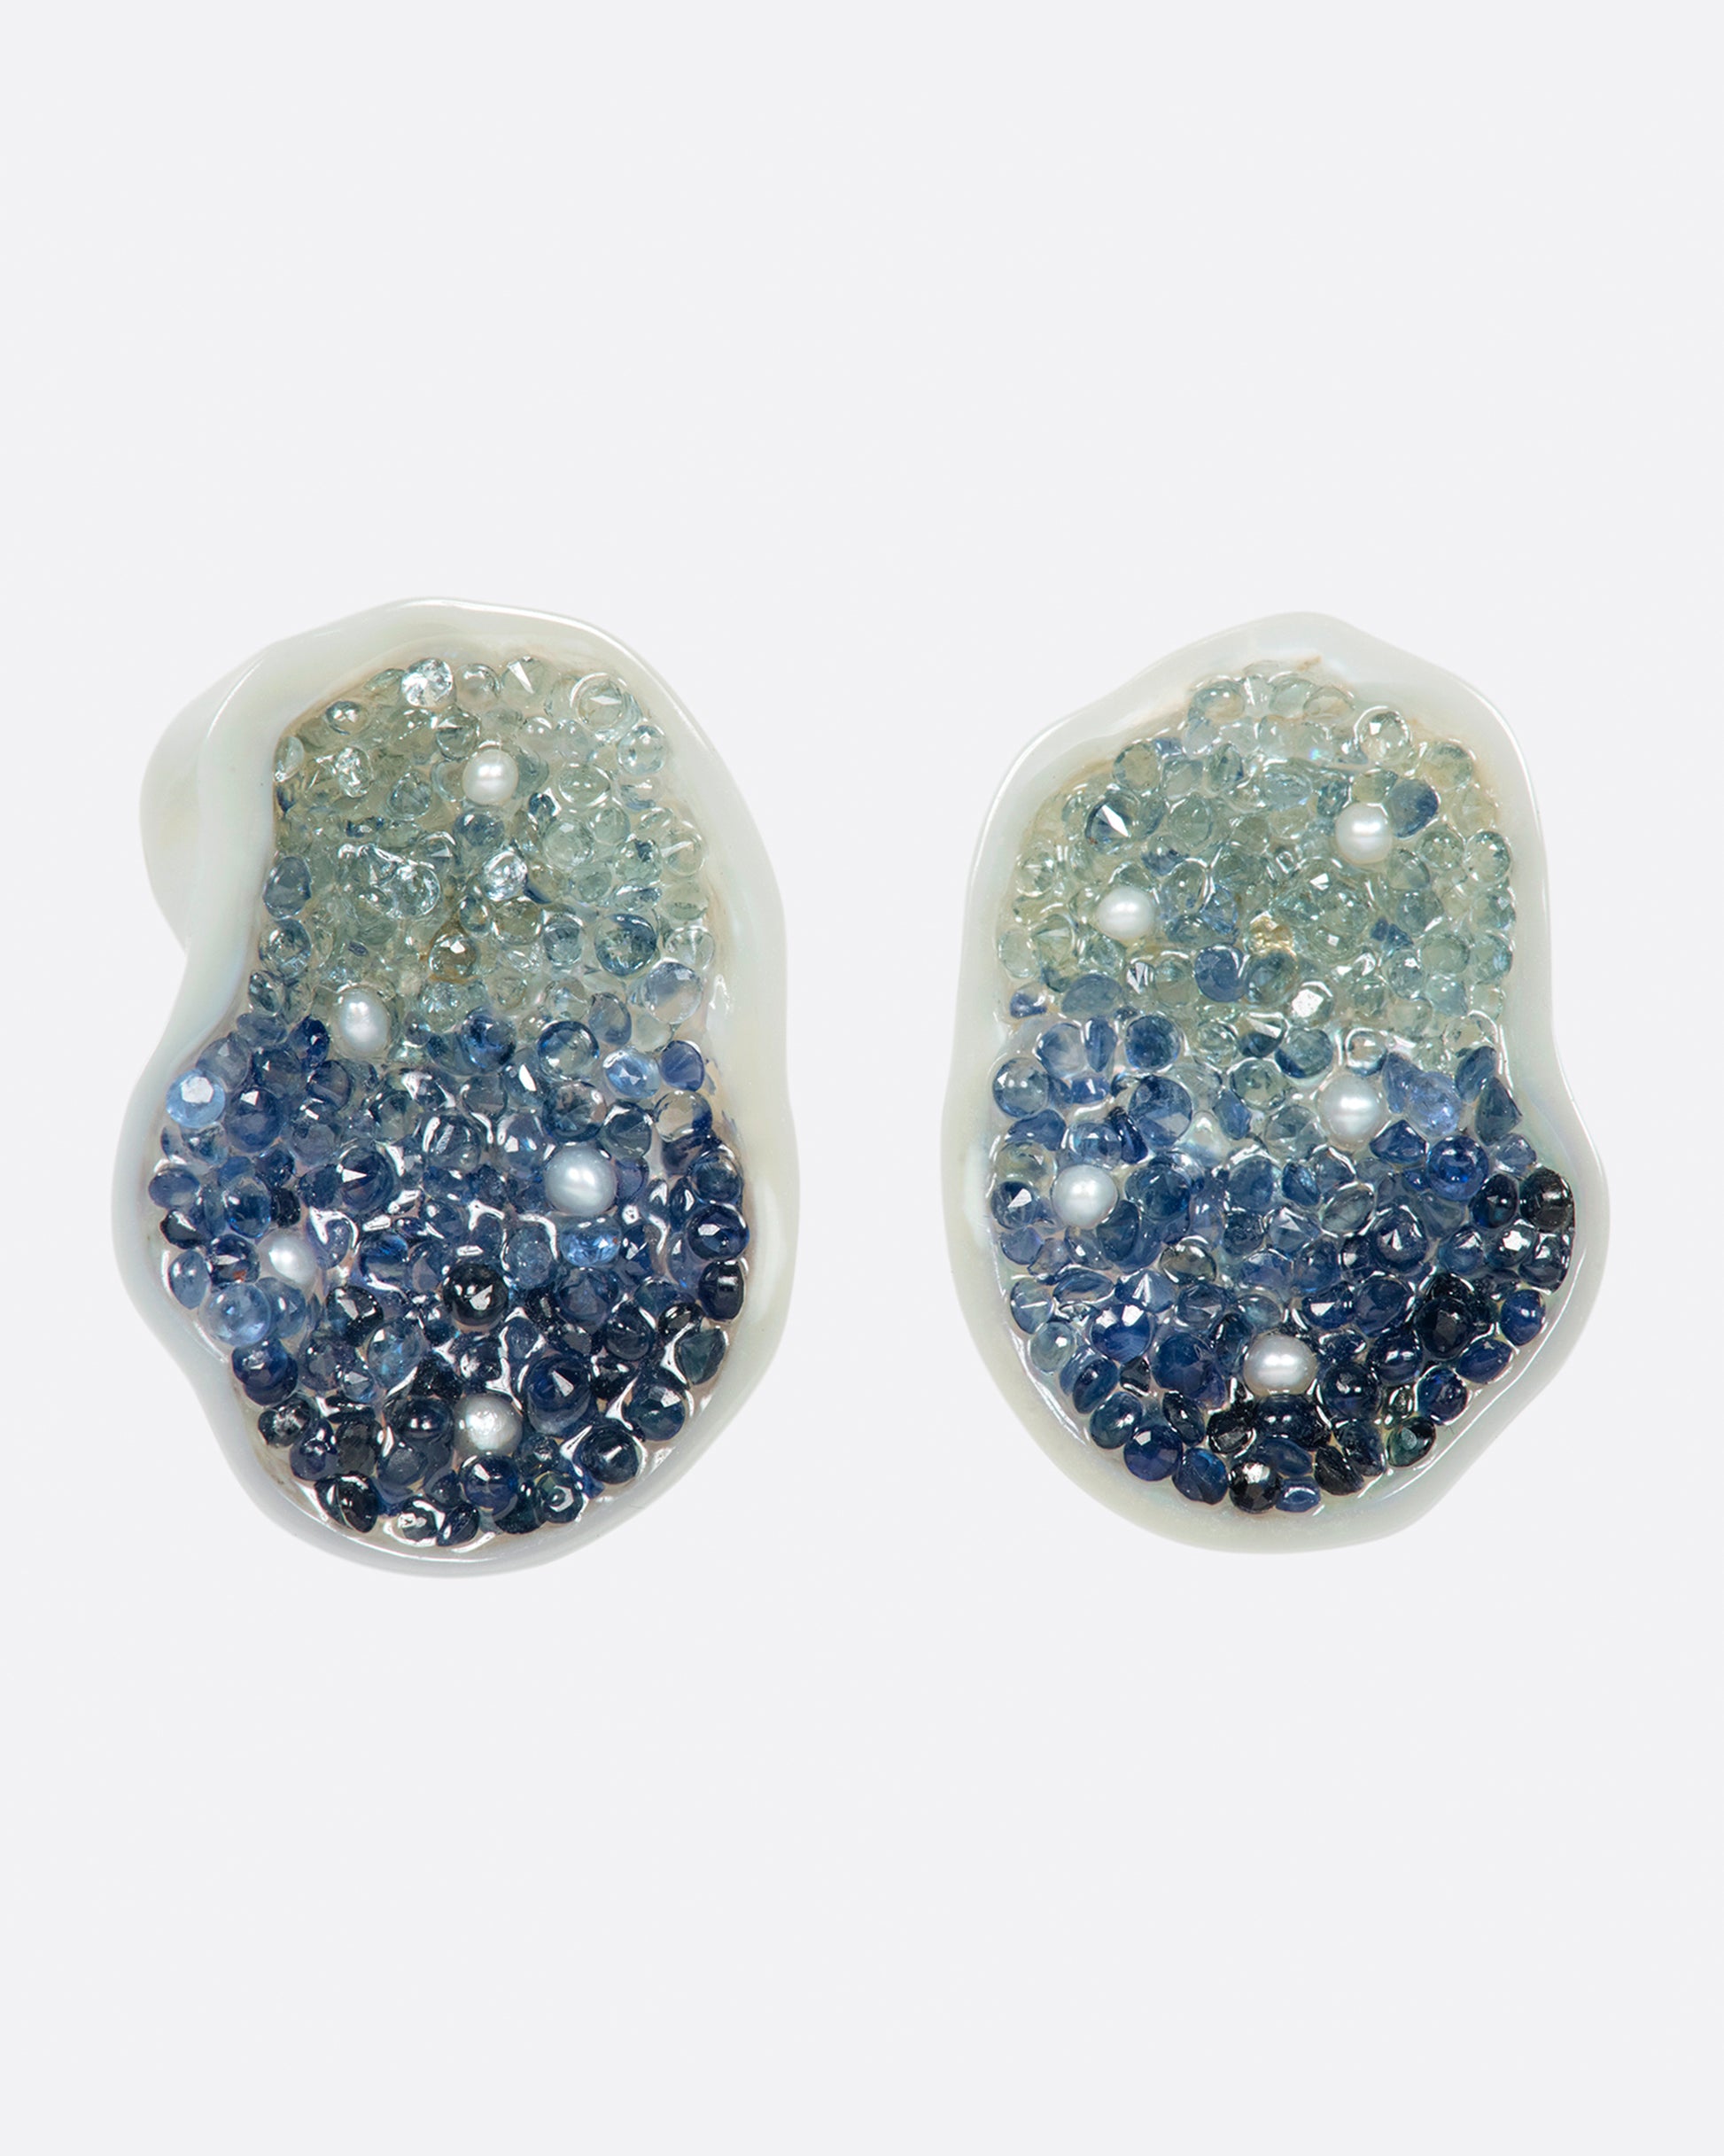 A pair of stud earrings made from halves on one freshwater soufflé pearl, lined with blue sapphires and seed pearls.